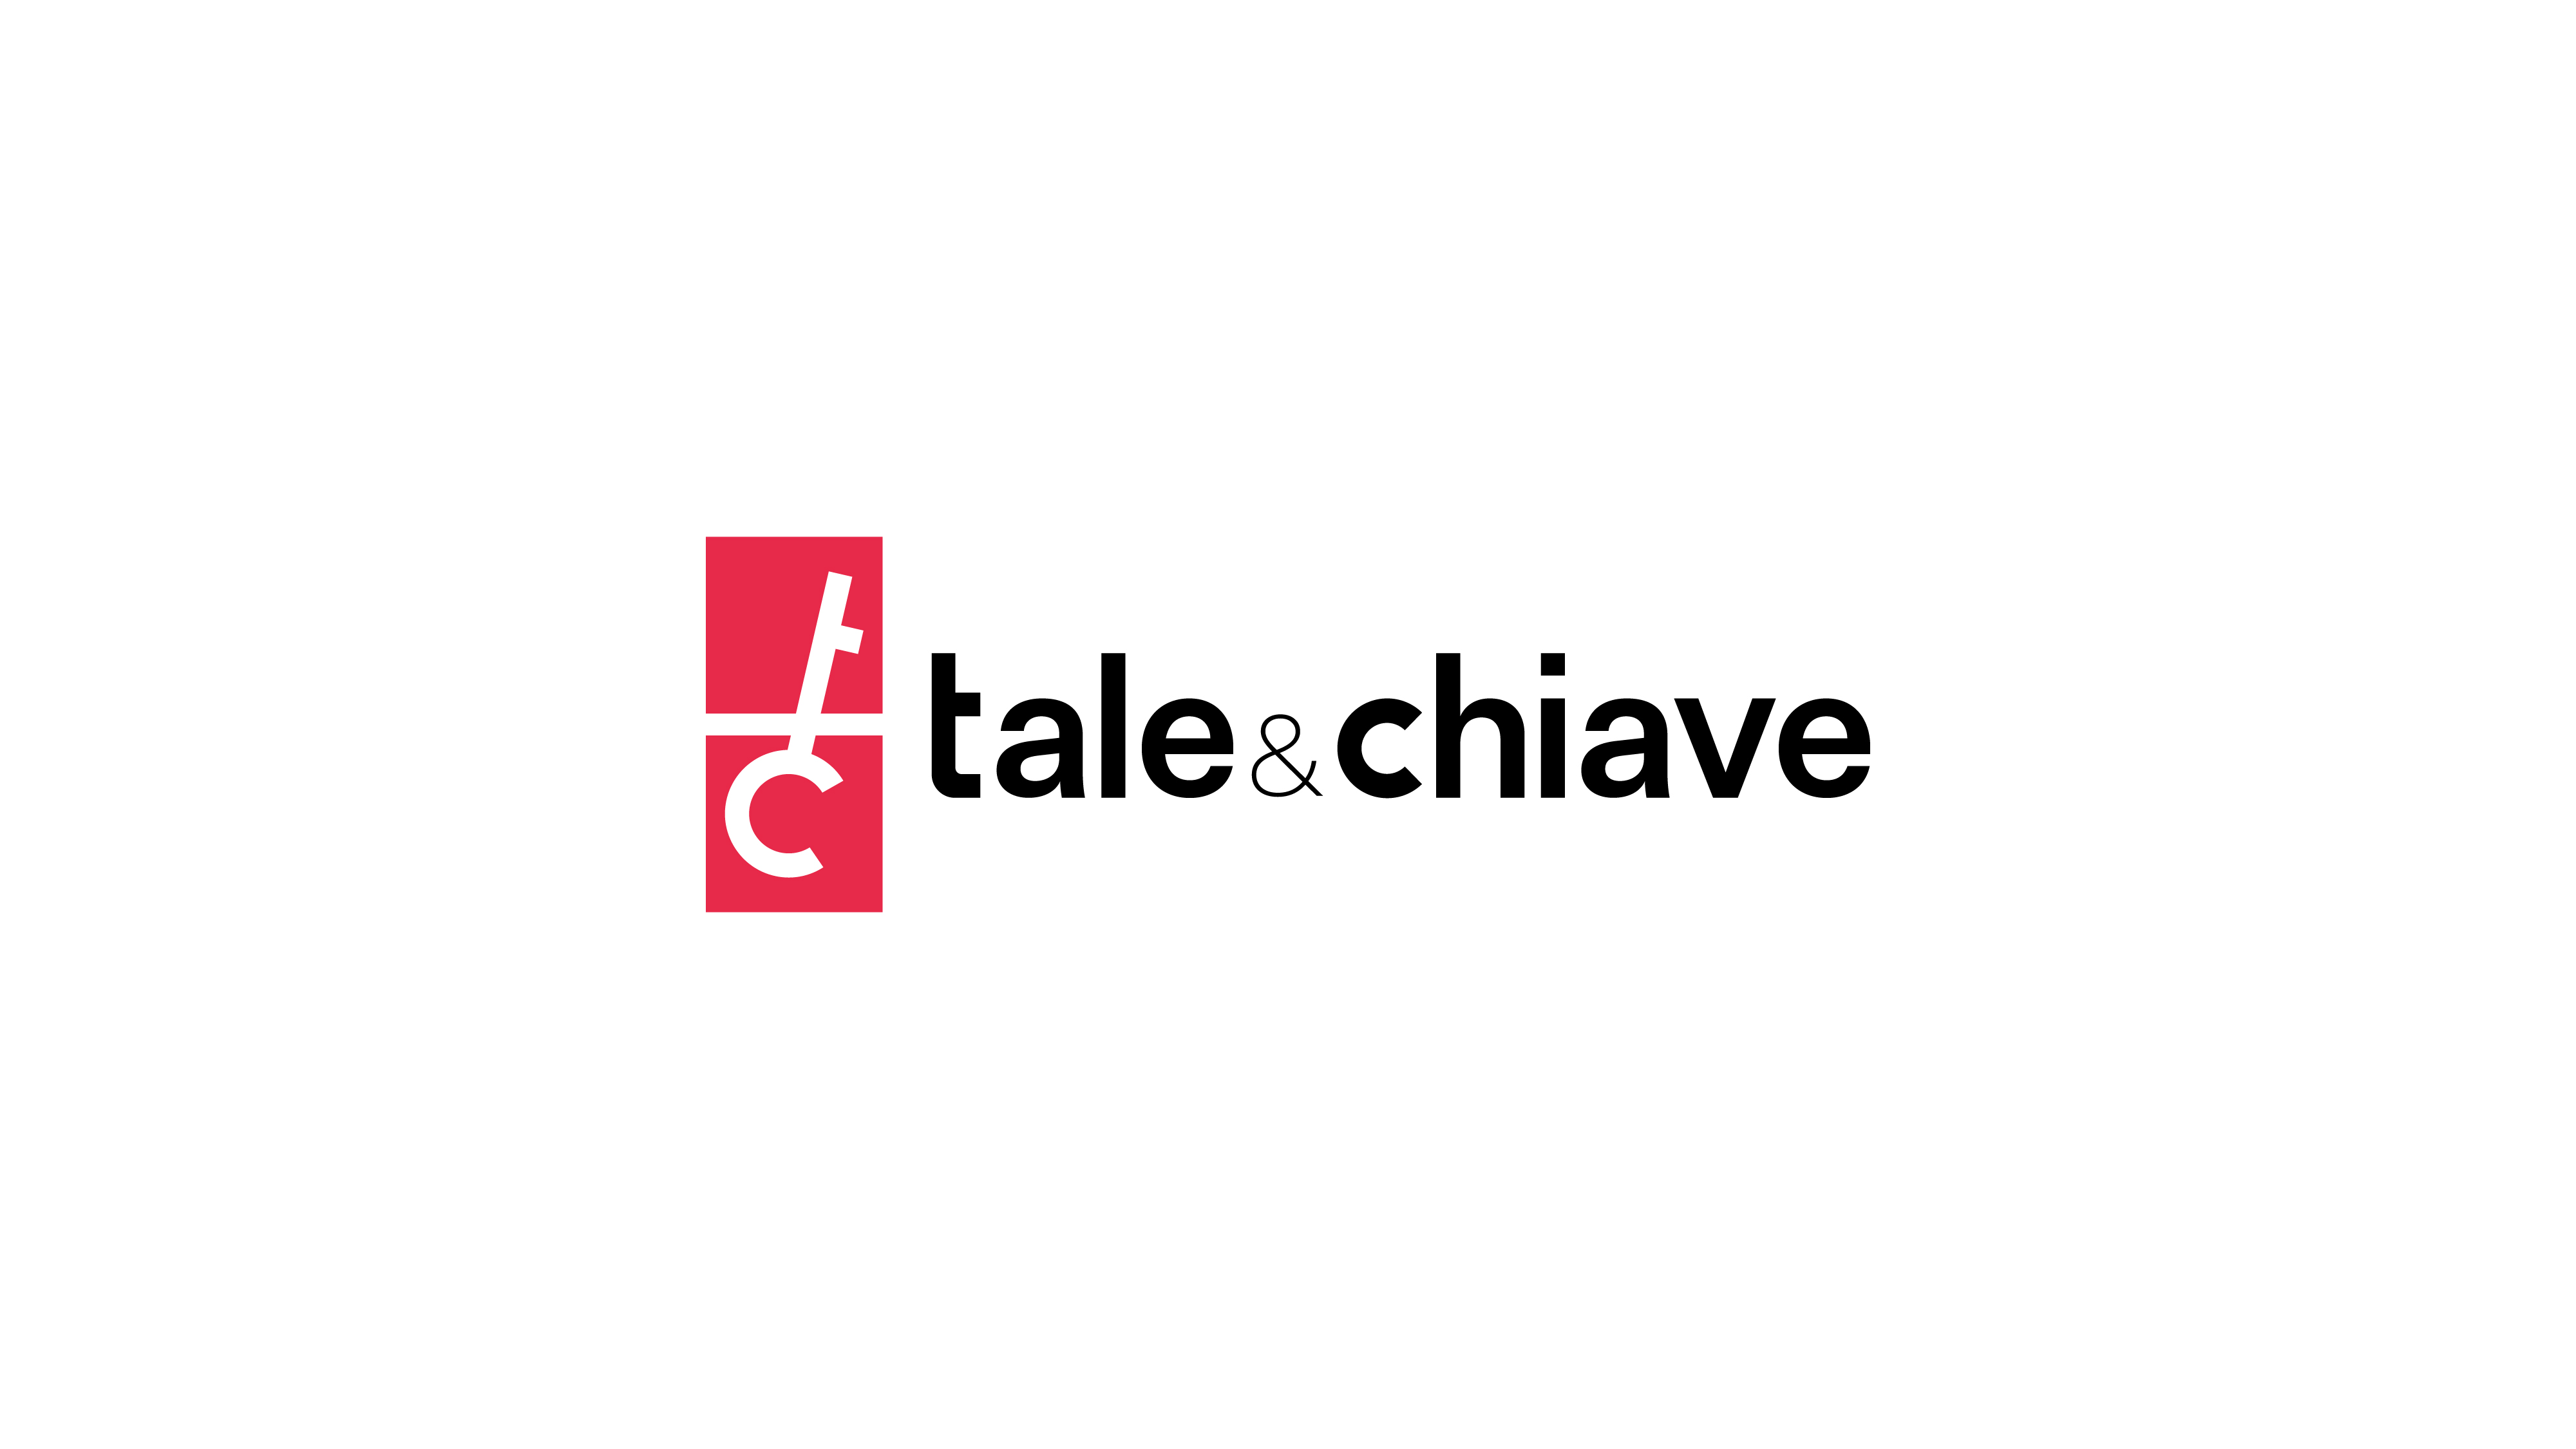 TALE & CHIAVE